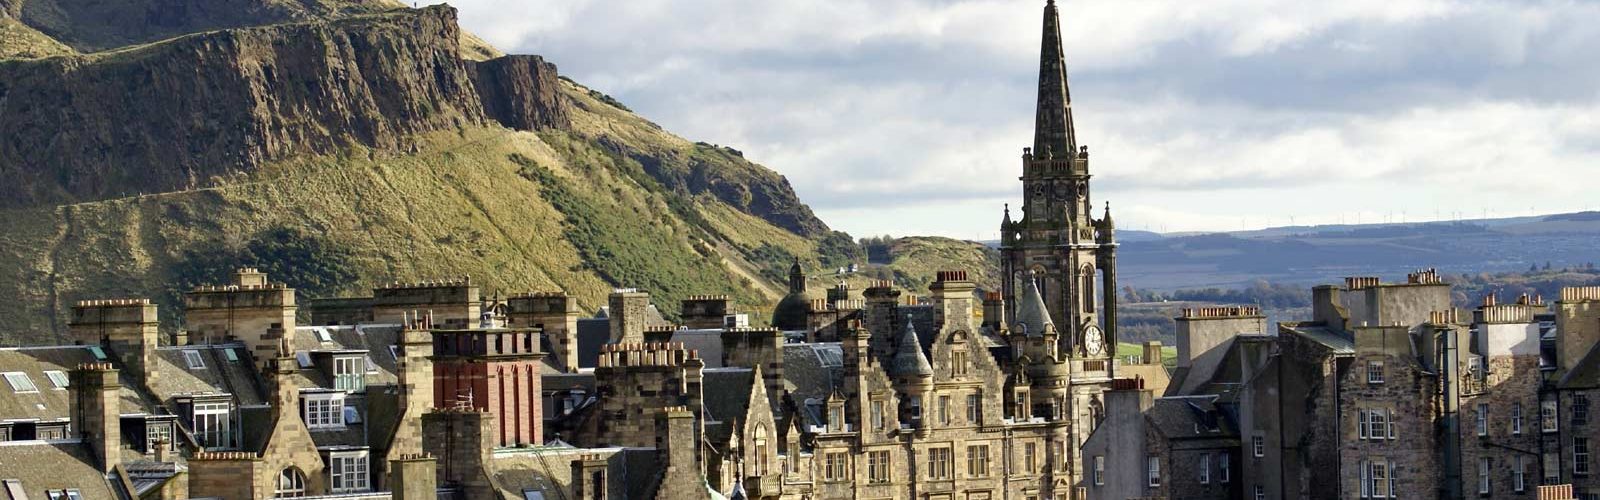 Edinburgh's Old Town with Arthurs Seat in background